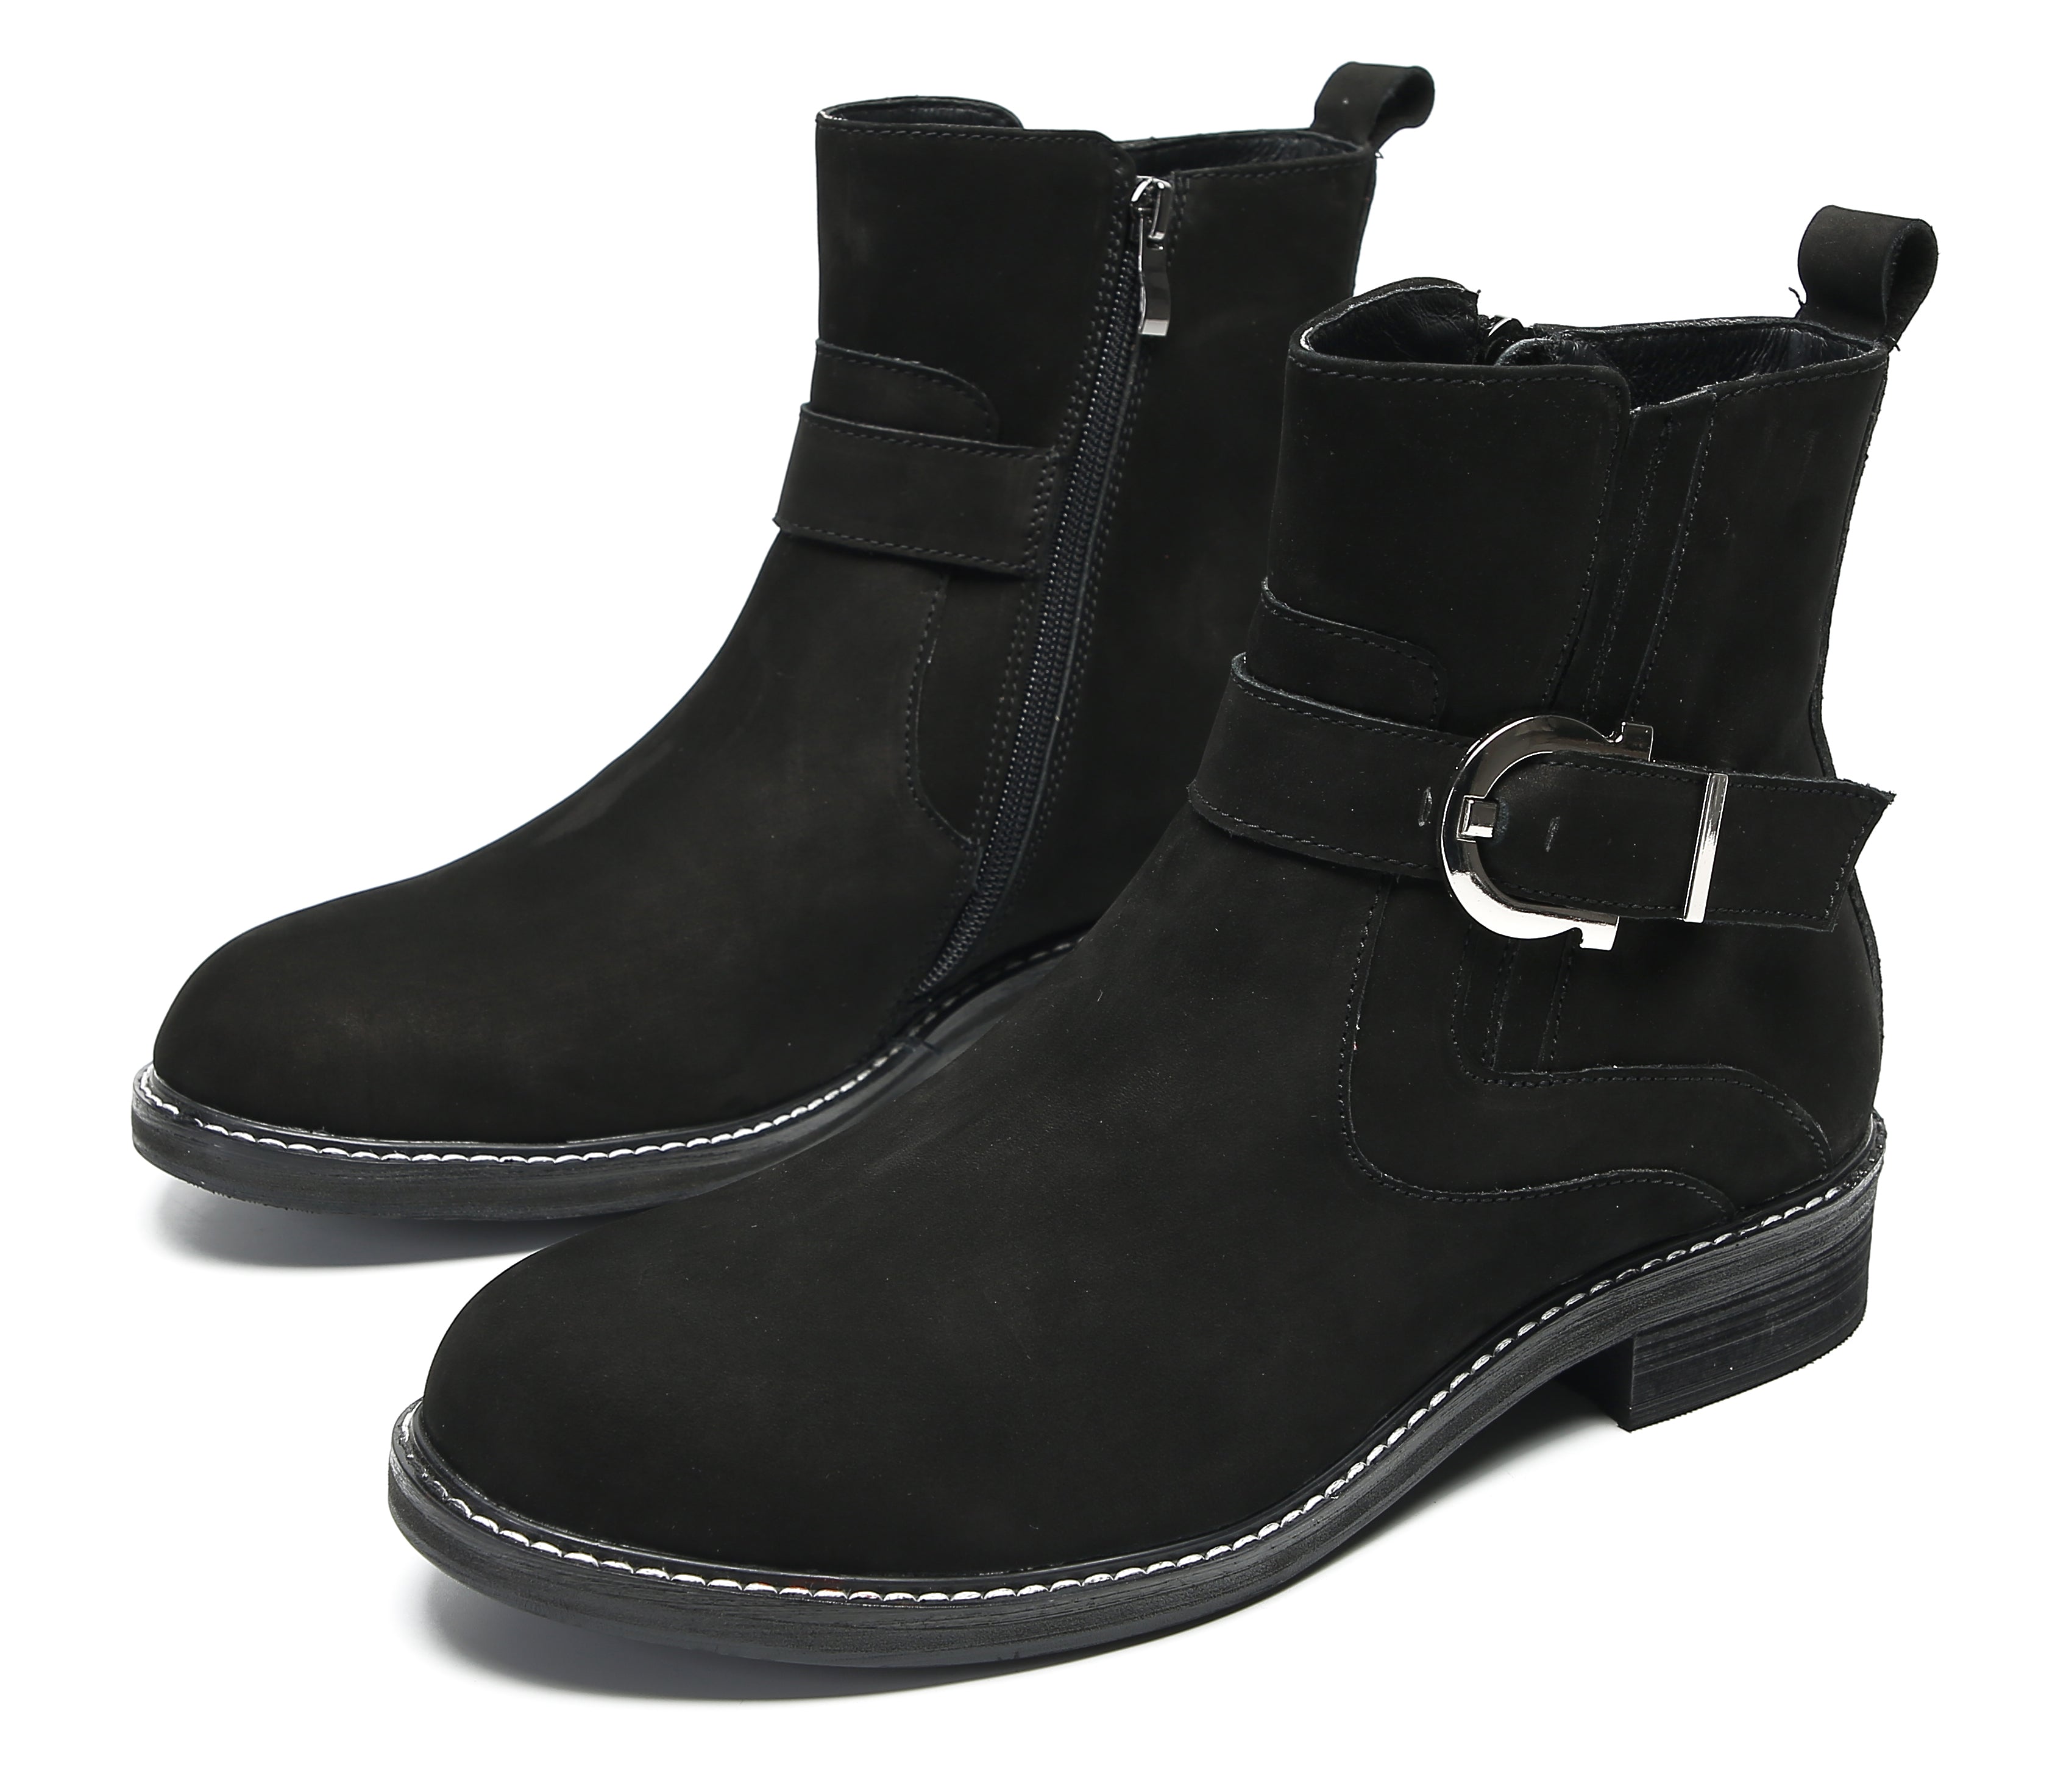 Men's Fashion Casual Buttons Boots